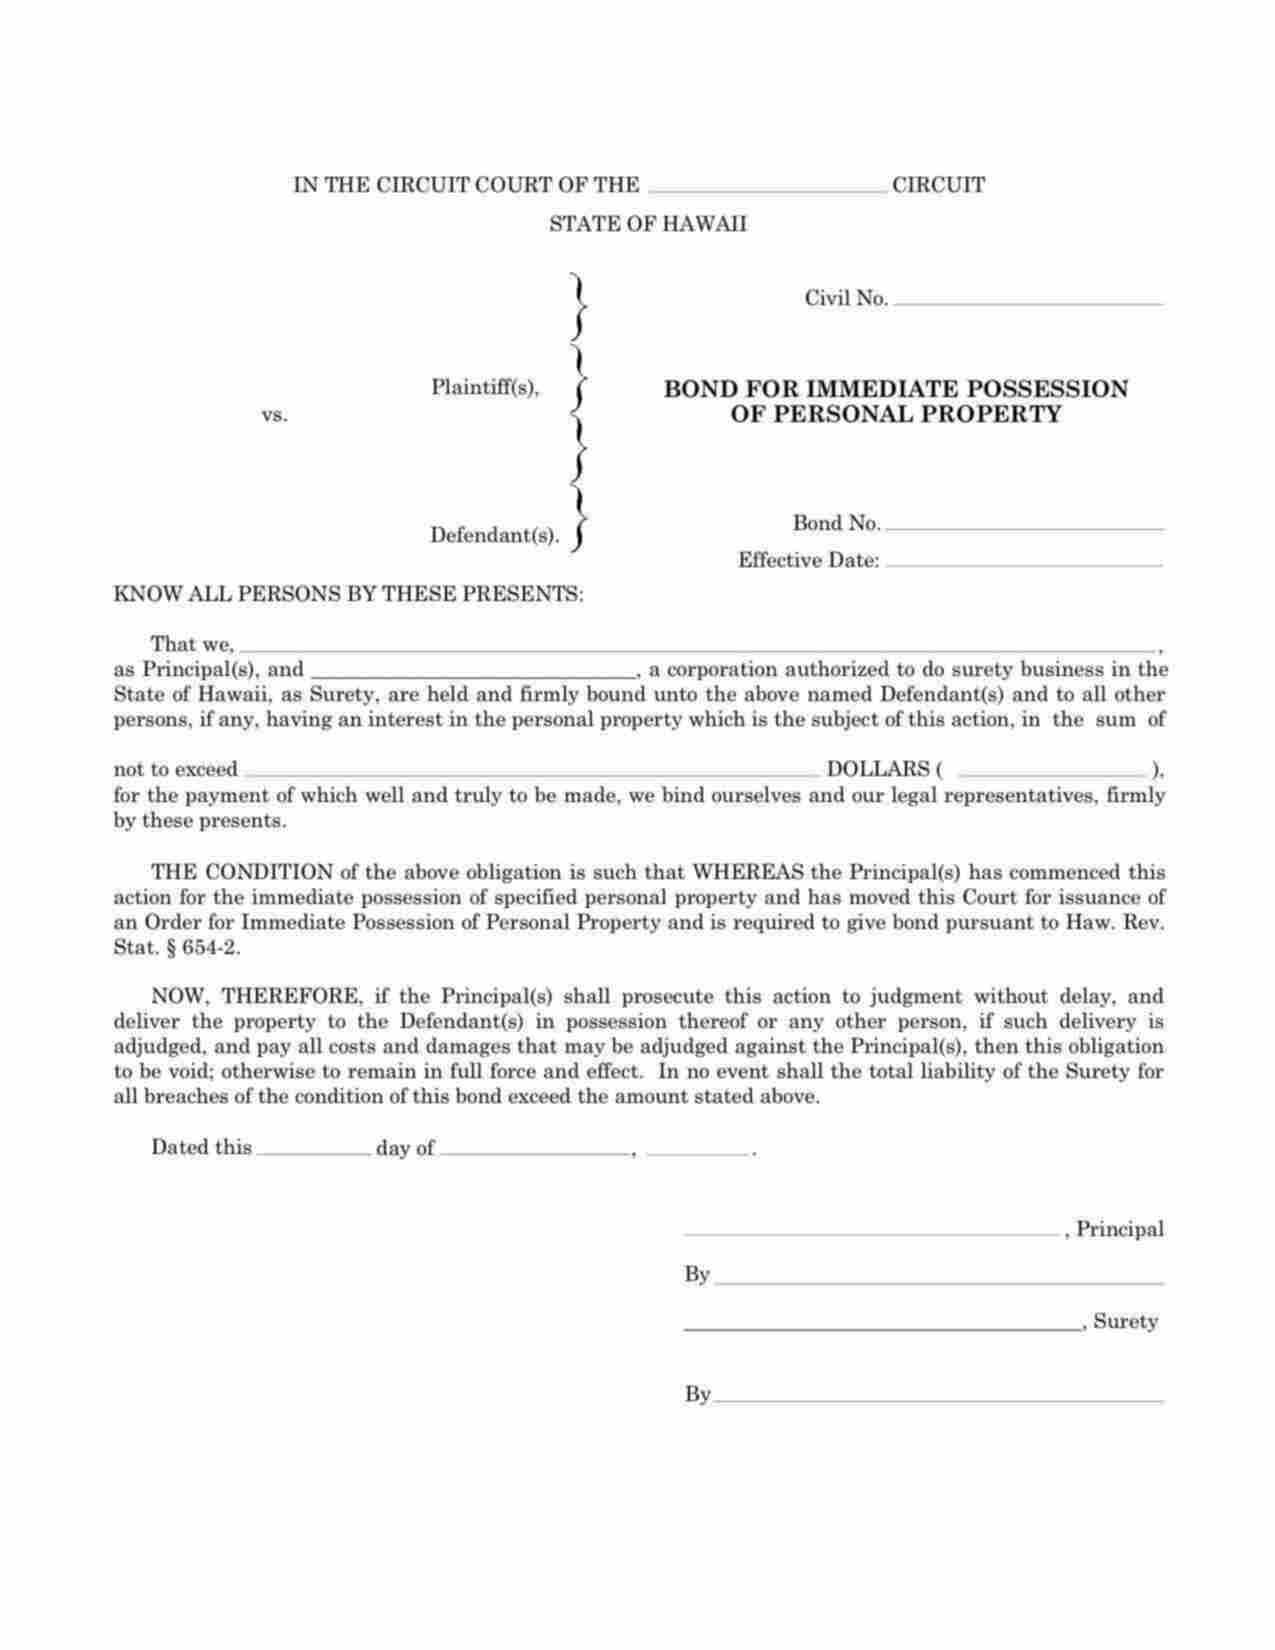 Hawaii Immediate Possession of Personal Property Bond Form